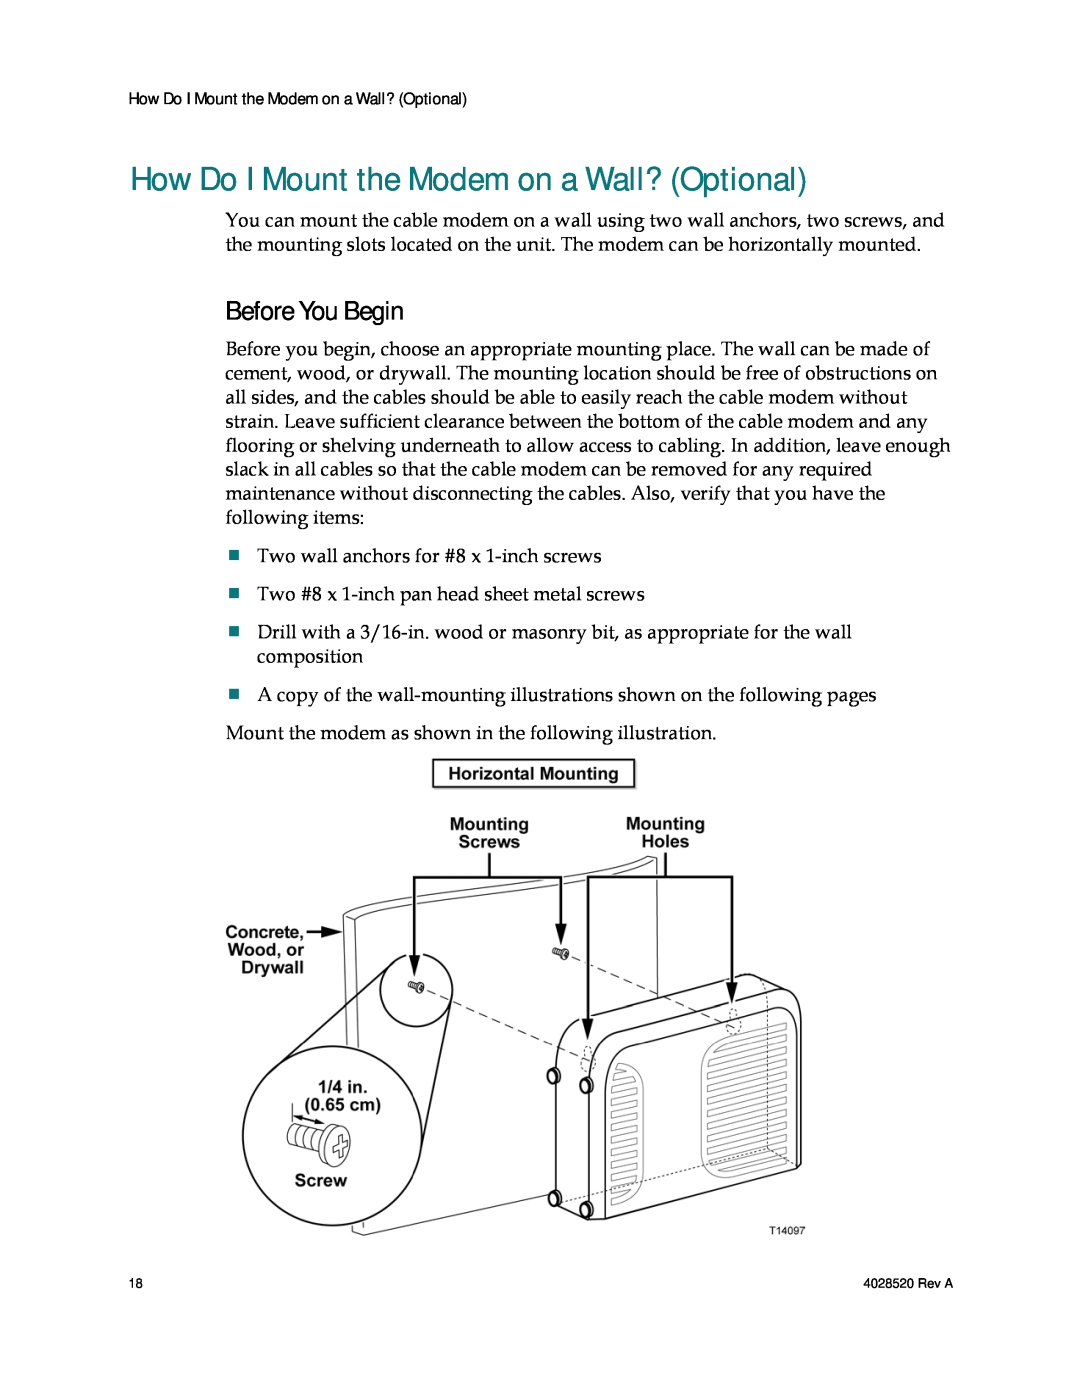 Cisco Systems DPQ2202 important safety instructions How Do I Mount the Modem on a Wall? Optional, Before You Begin 